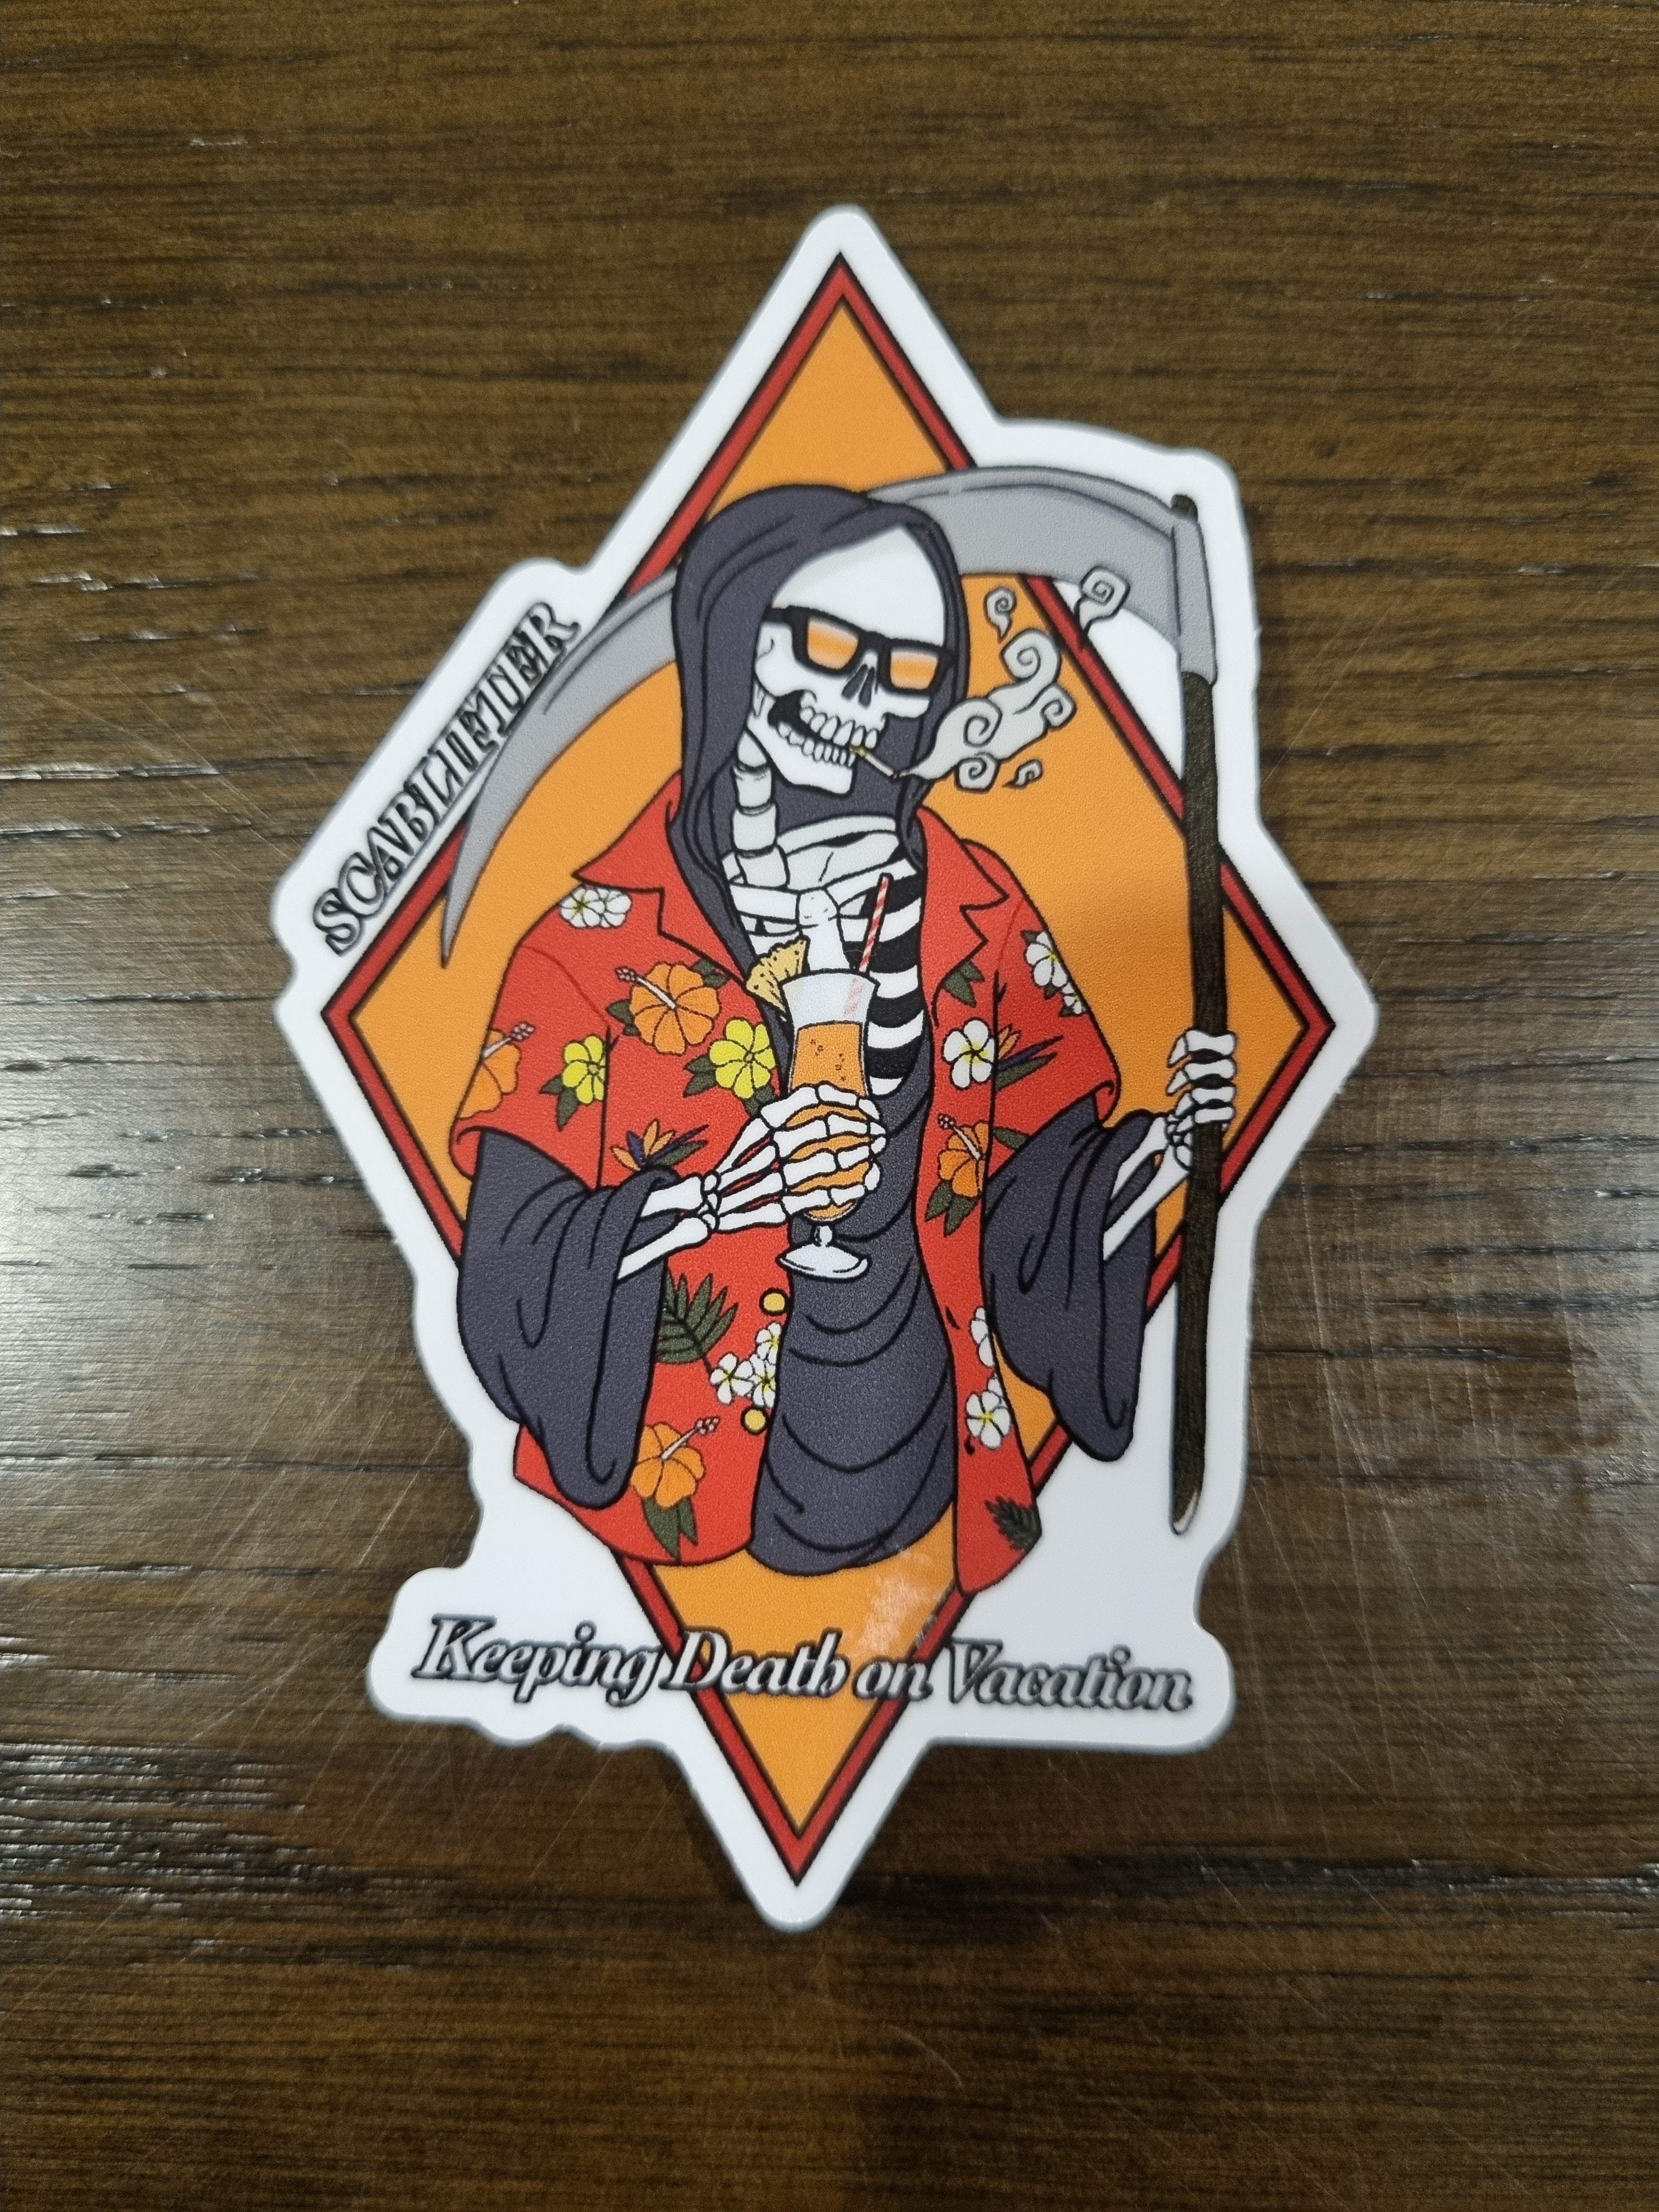 Keeping Death on Vacation Sticker